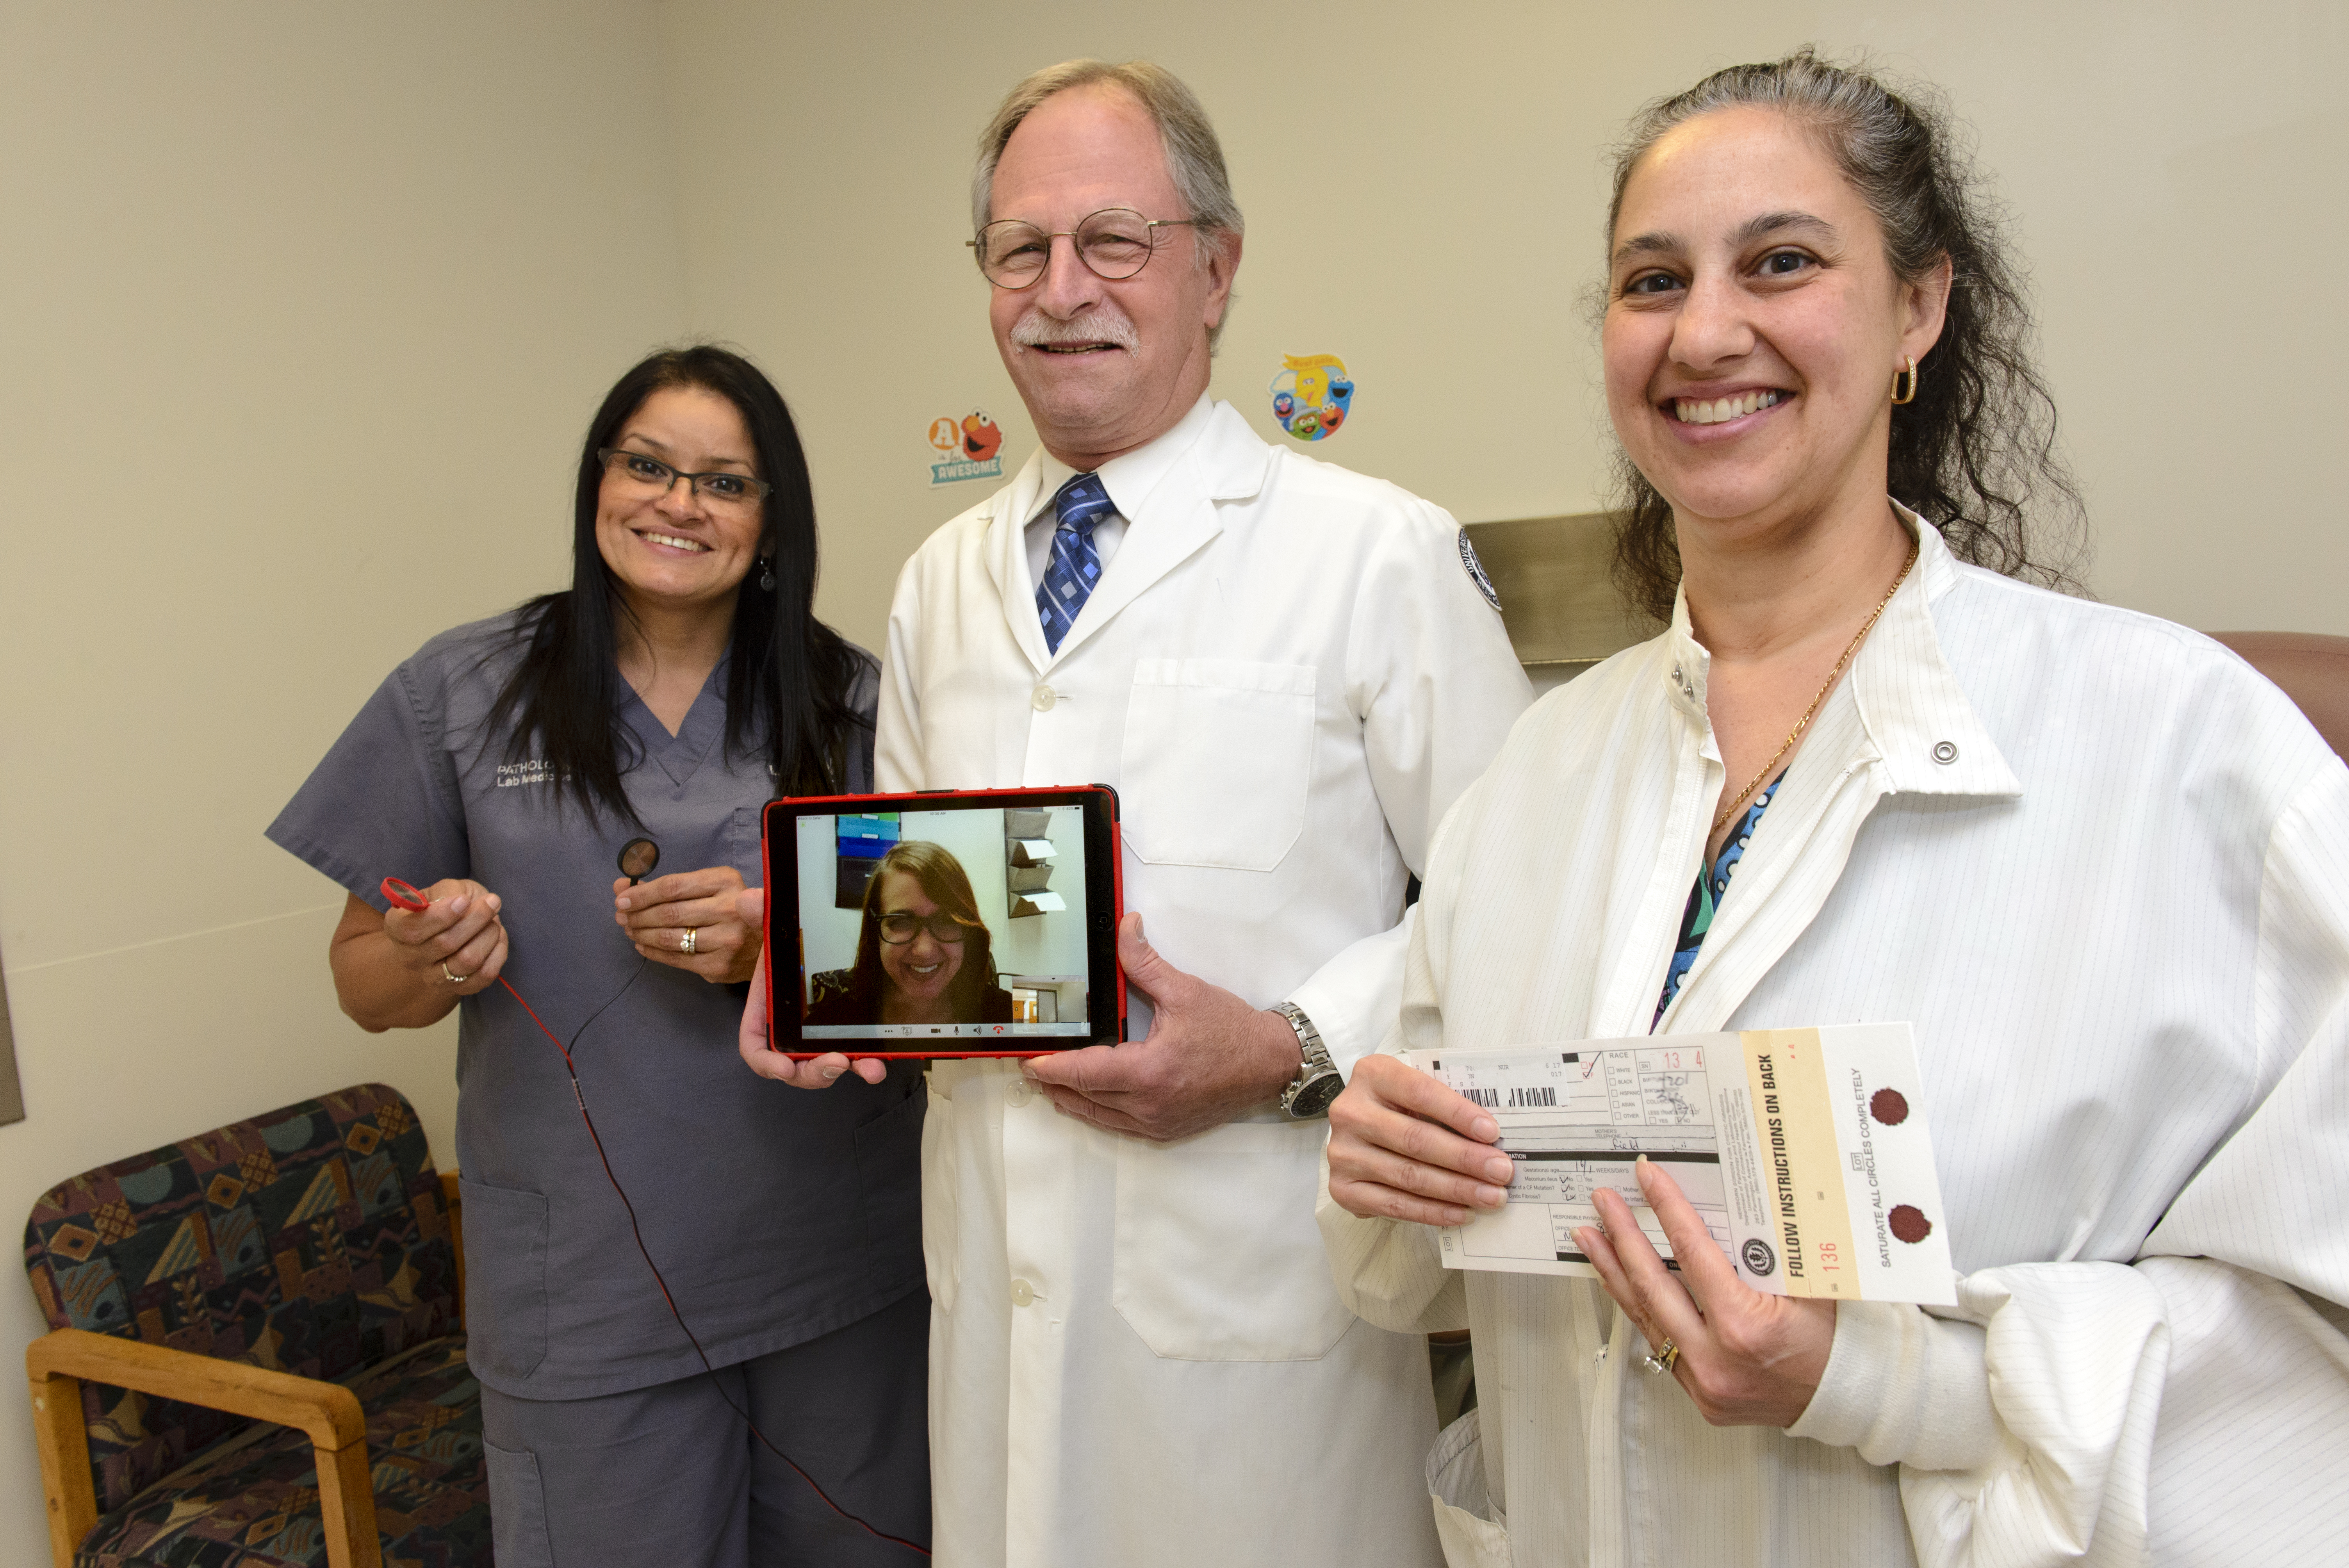 UConn Health's Myra Rivera, Sidney Hopfer, and Giuseppa Santaniello (left to right) demonstrate tools used to screen newborns for cystic fibrosis and provide genetic counseling for parents. On the tablet is Amy Jonasson, a certified genetic counselor from University of Florida Health. (Photo by Janine Gelineau)